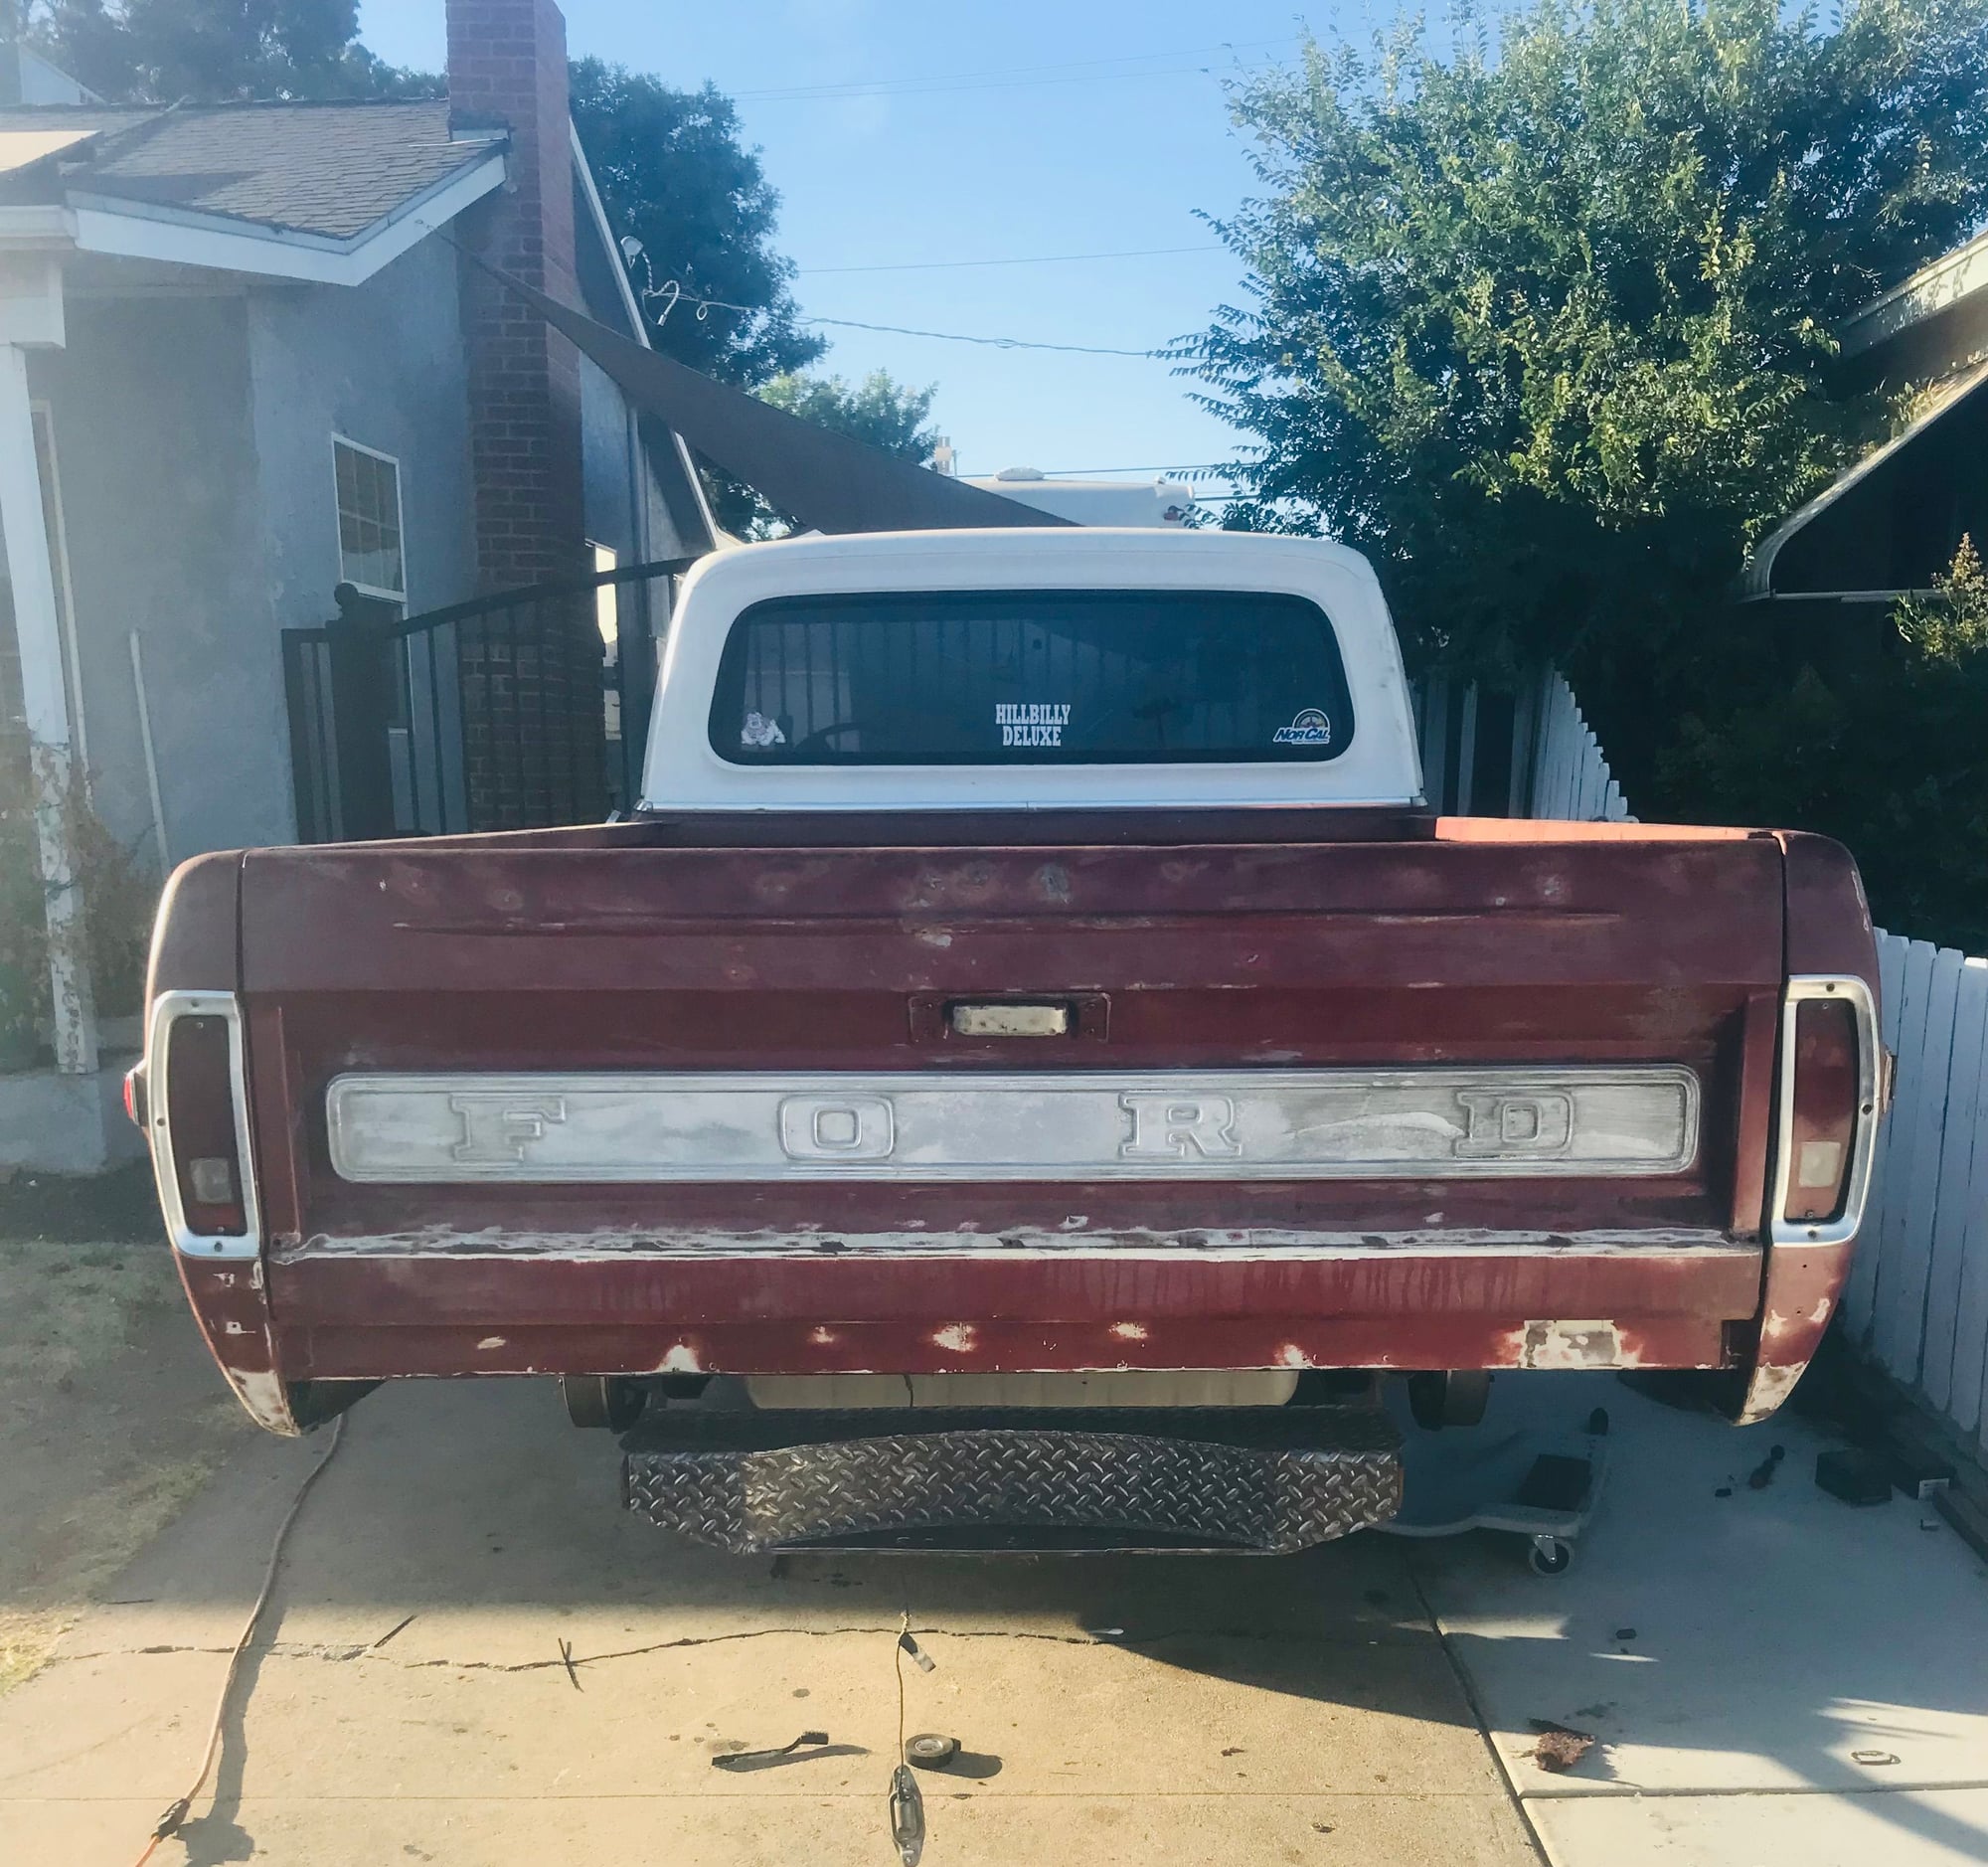 1971 Ford F-100 - f100 parts complete project sell or trade - Used - VIN f10yrk07516 - 8 cyl - 2WD - Automatic - Truck - Red - Fresno, CA 93703, United States